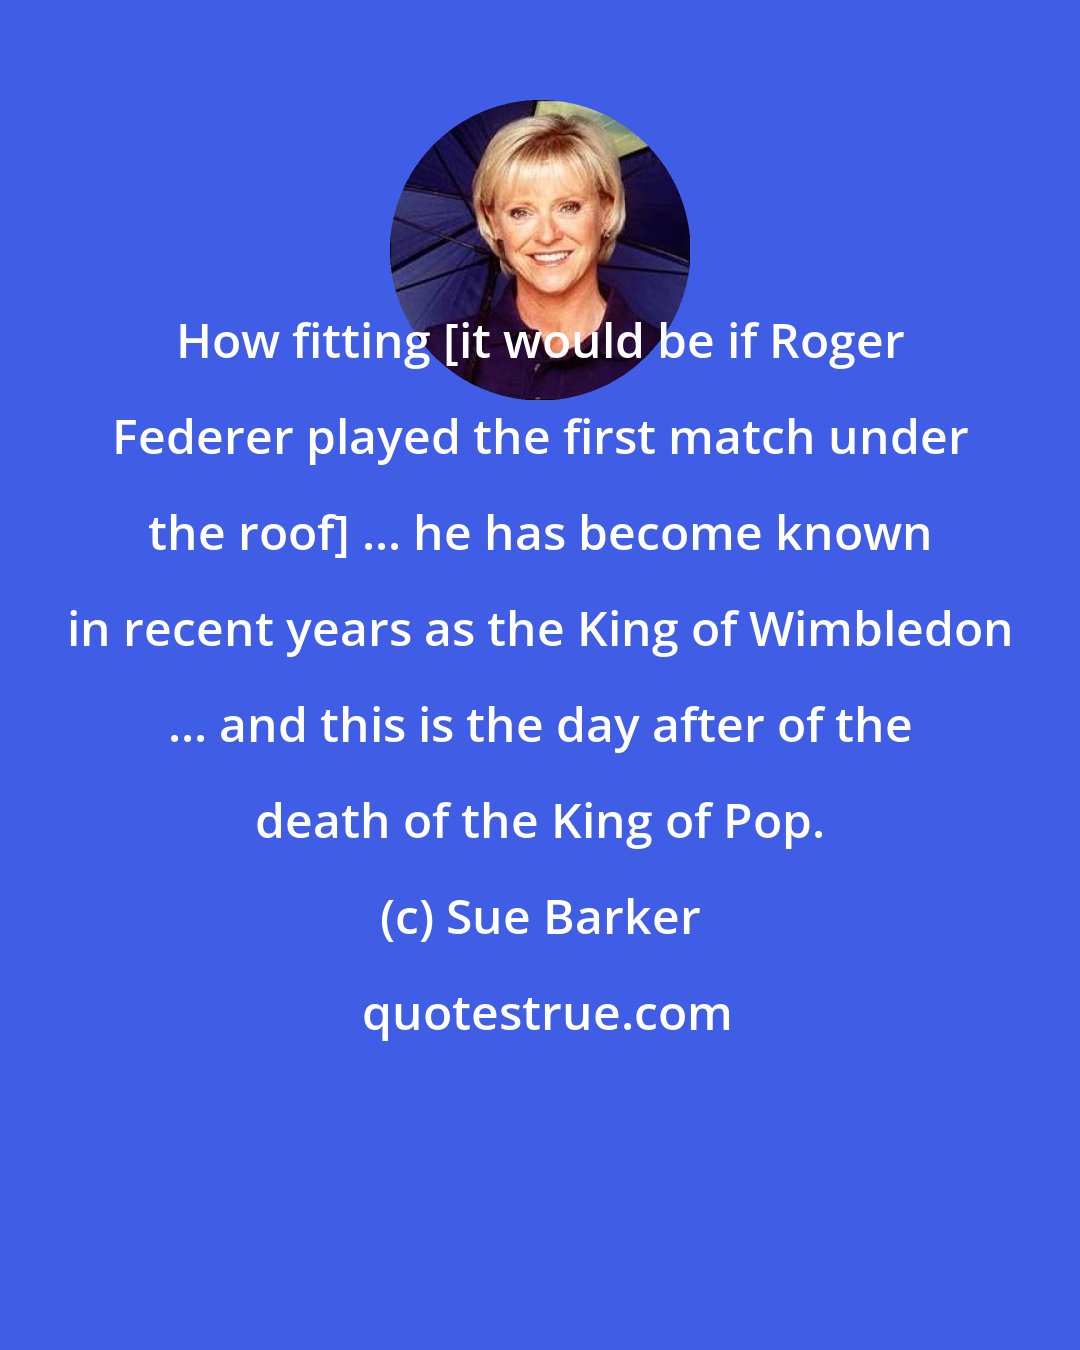 Sue Barker: How fitting [it would be if Roger Federer played the first match under the roof] ... he has become known in recent years as the King of Wimbledon ... and this is the day after of the death of the King of Pop.